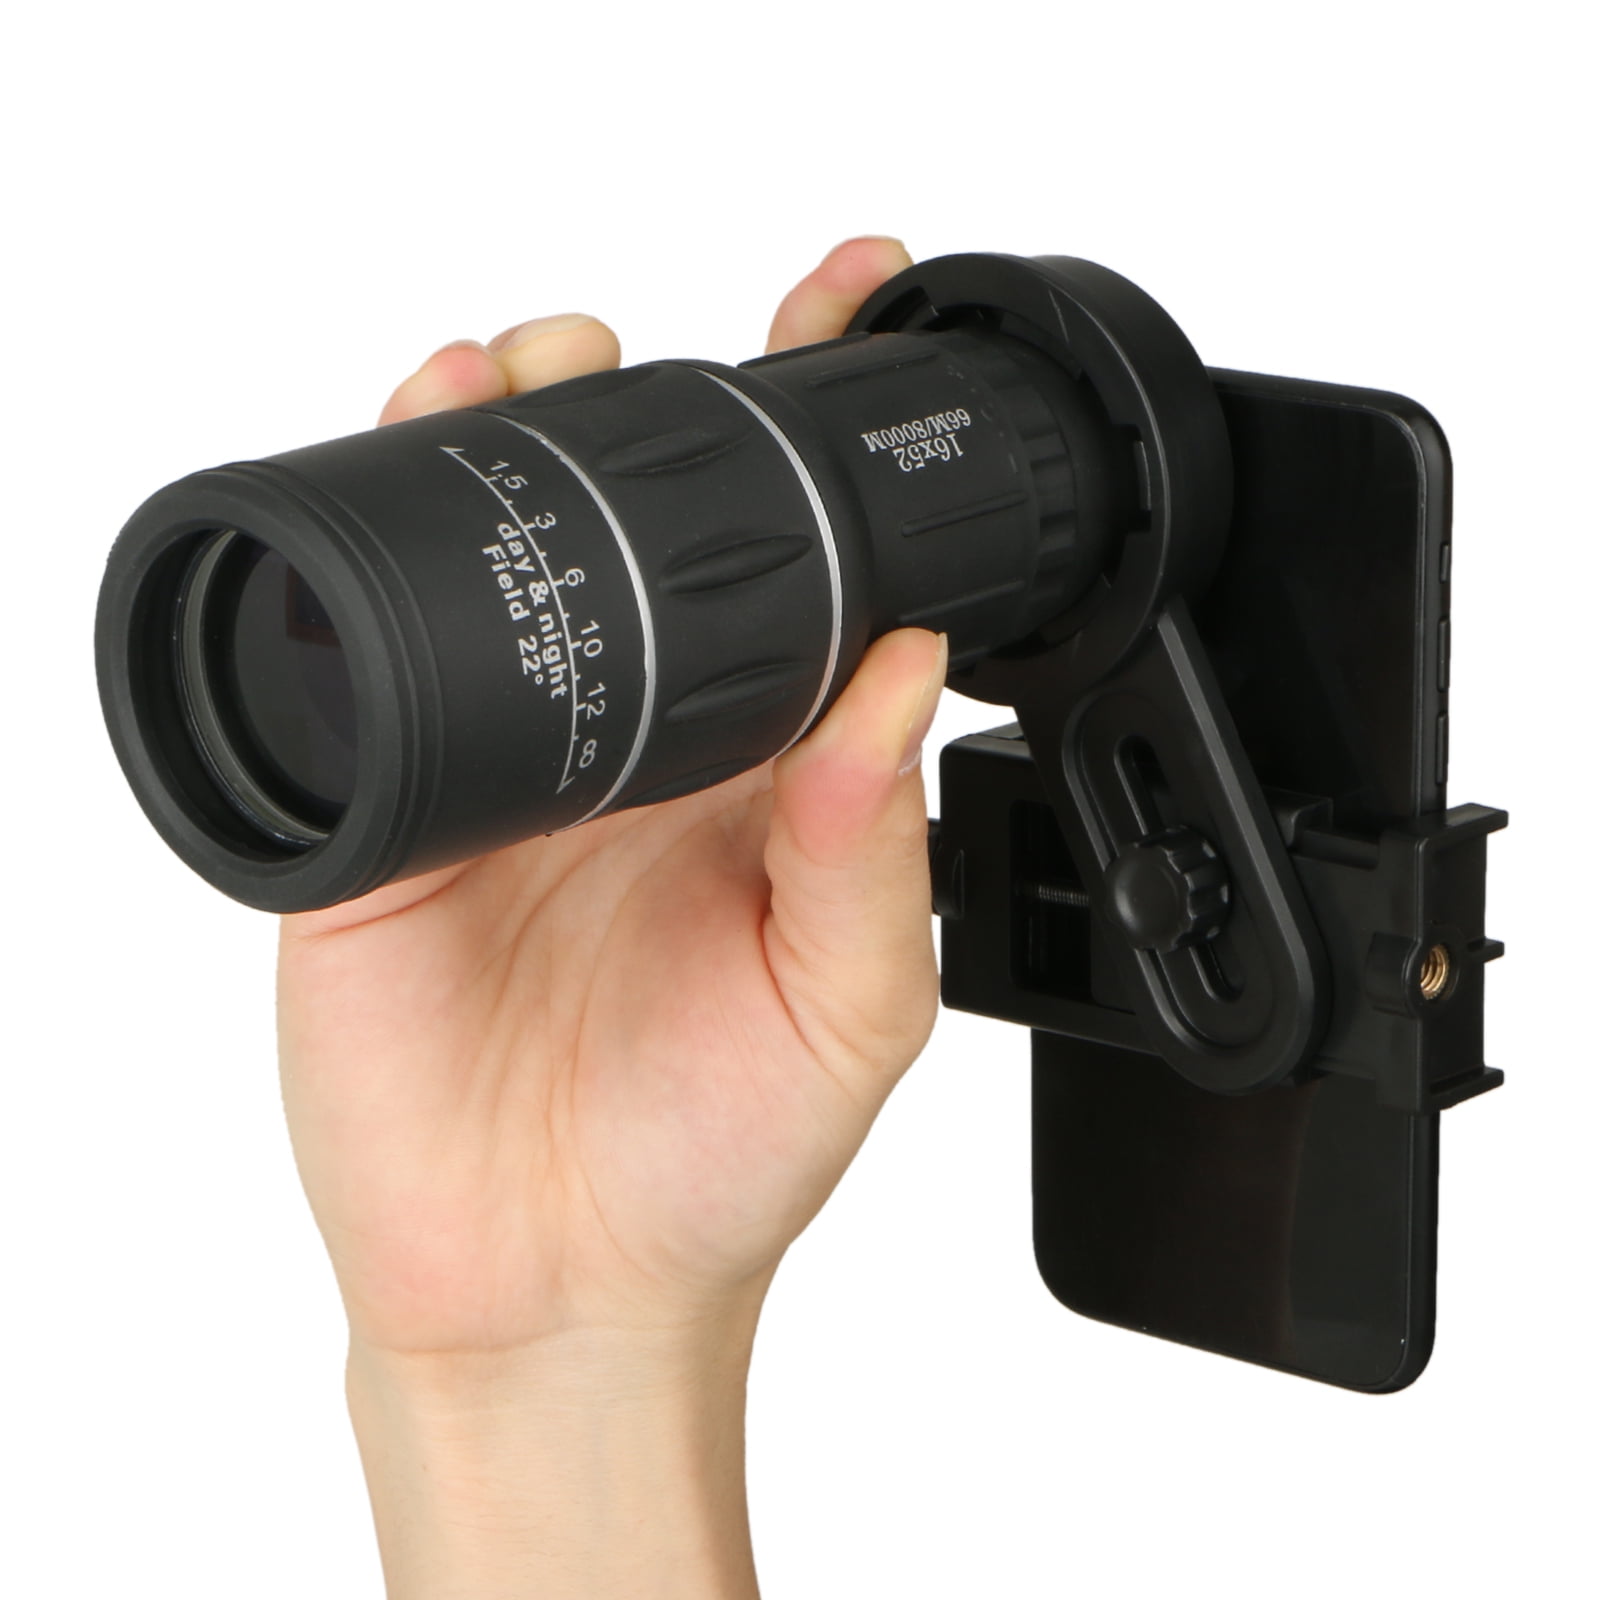 New Type Anti-Fall Universal Smart Phone Adapter Mount Compatible with Binoculars Bird-Watching Mirrors Large Spotting Scopes Microscopes Etc.Suitable for Almost All Brands of Smart Phones 